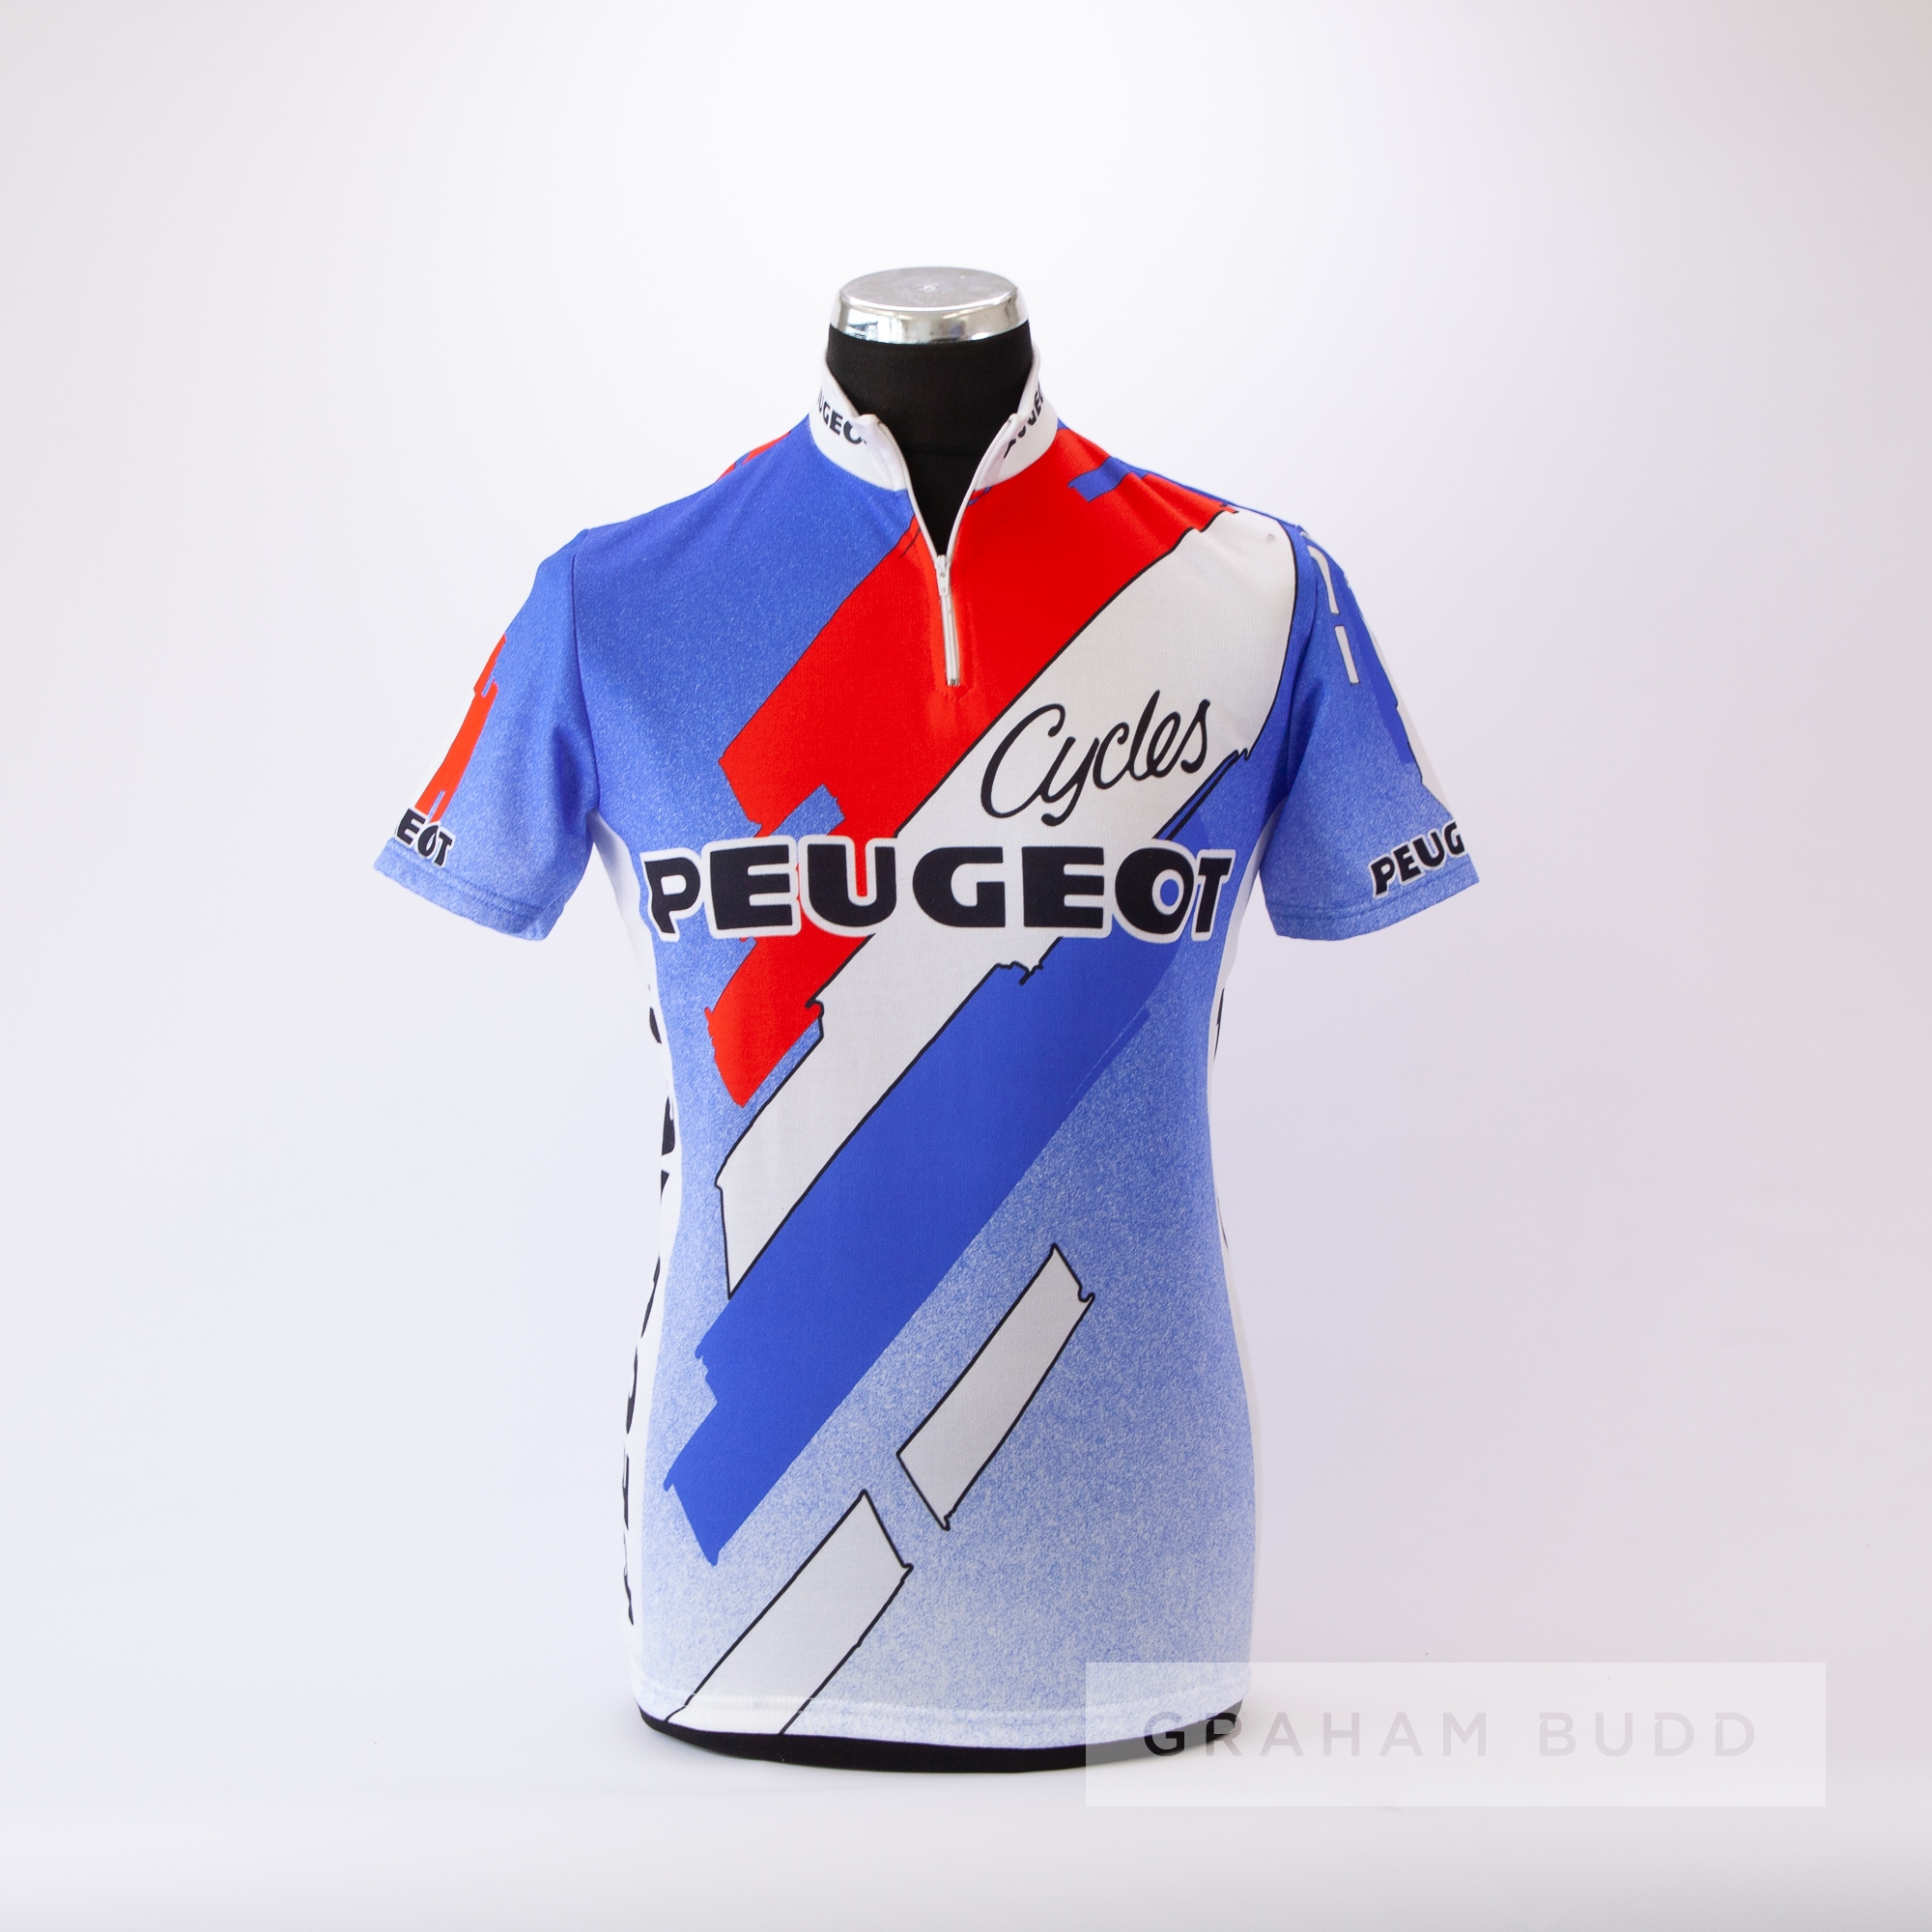 1985 white, red and blue Peugeot Cycles Cycling team race jersey, scarce, polyester short-sleeved - Image 3 of 4